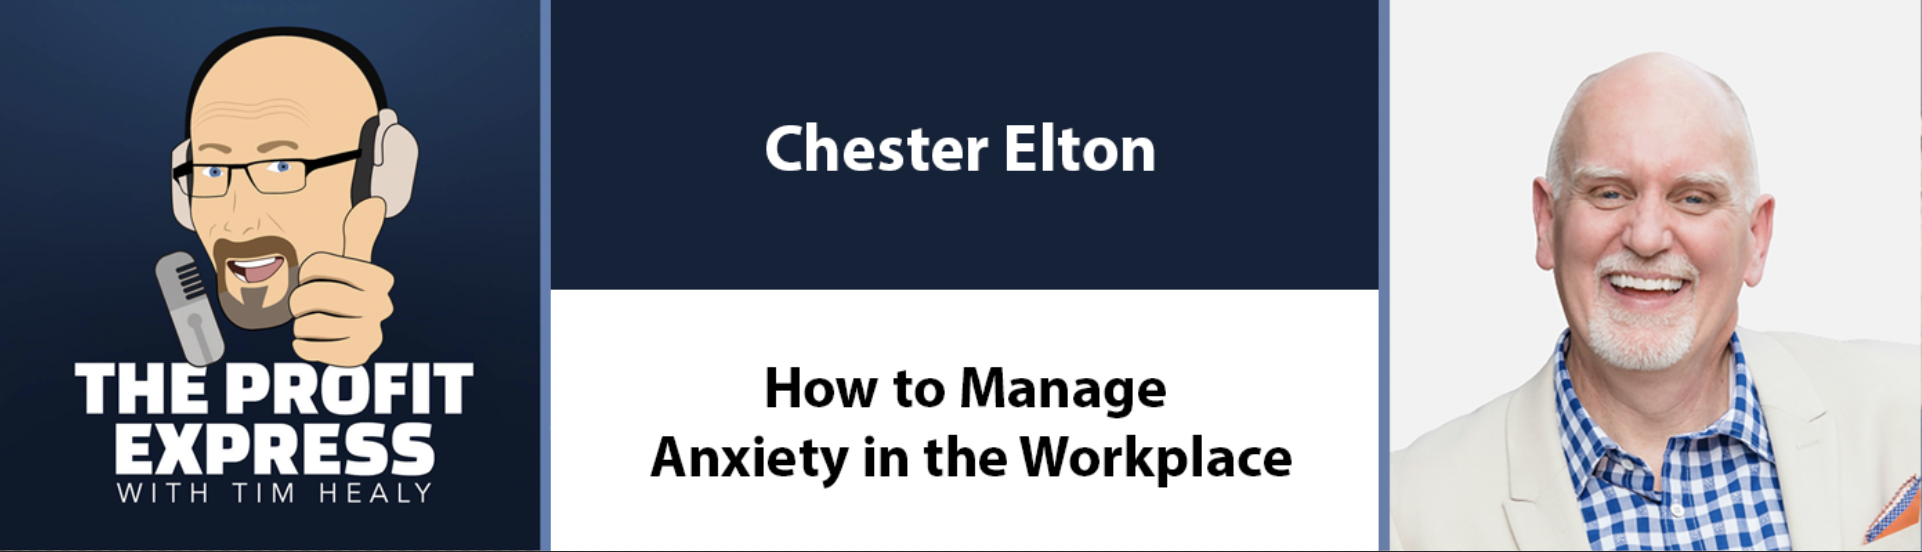 How to Manage Anxiety in the Workplace